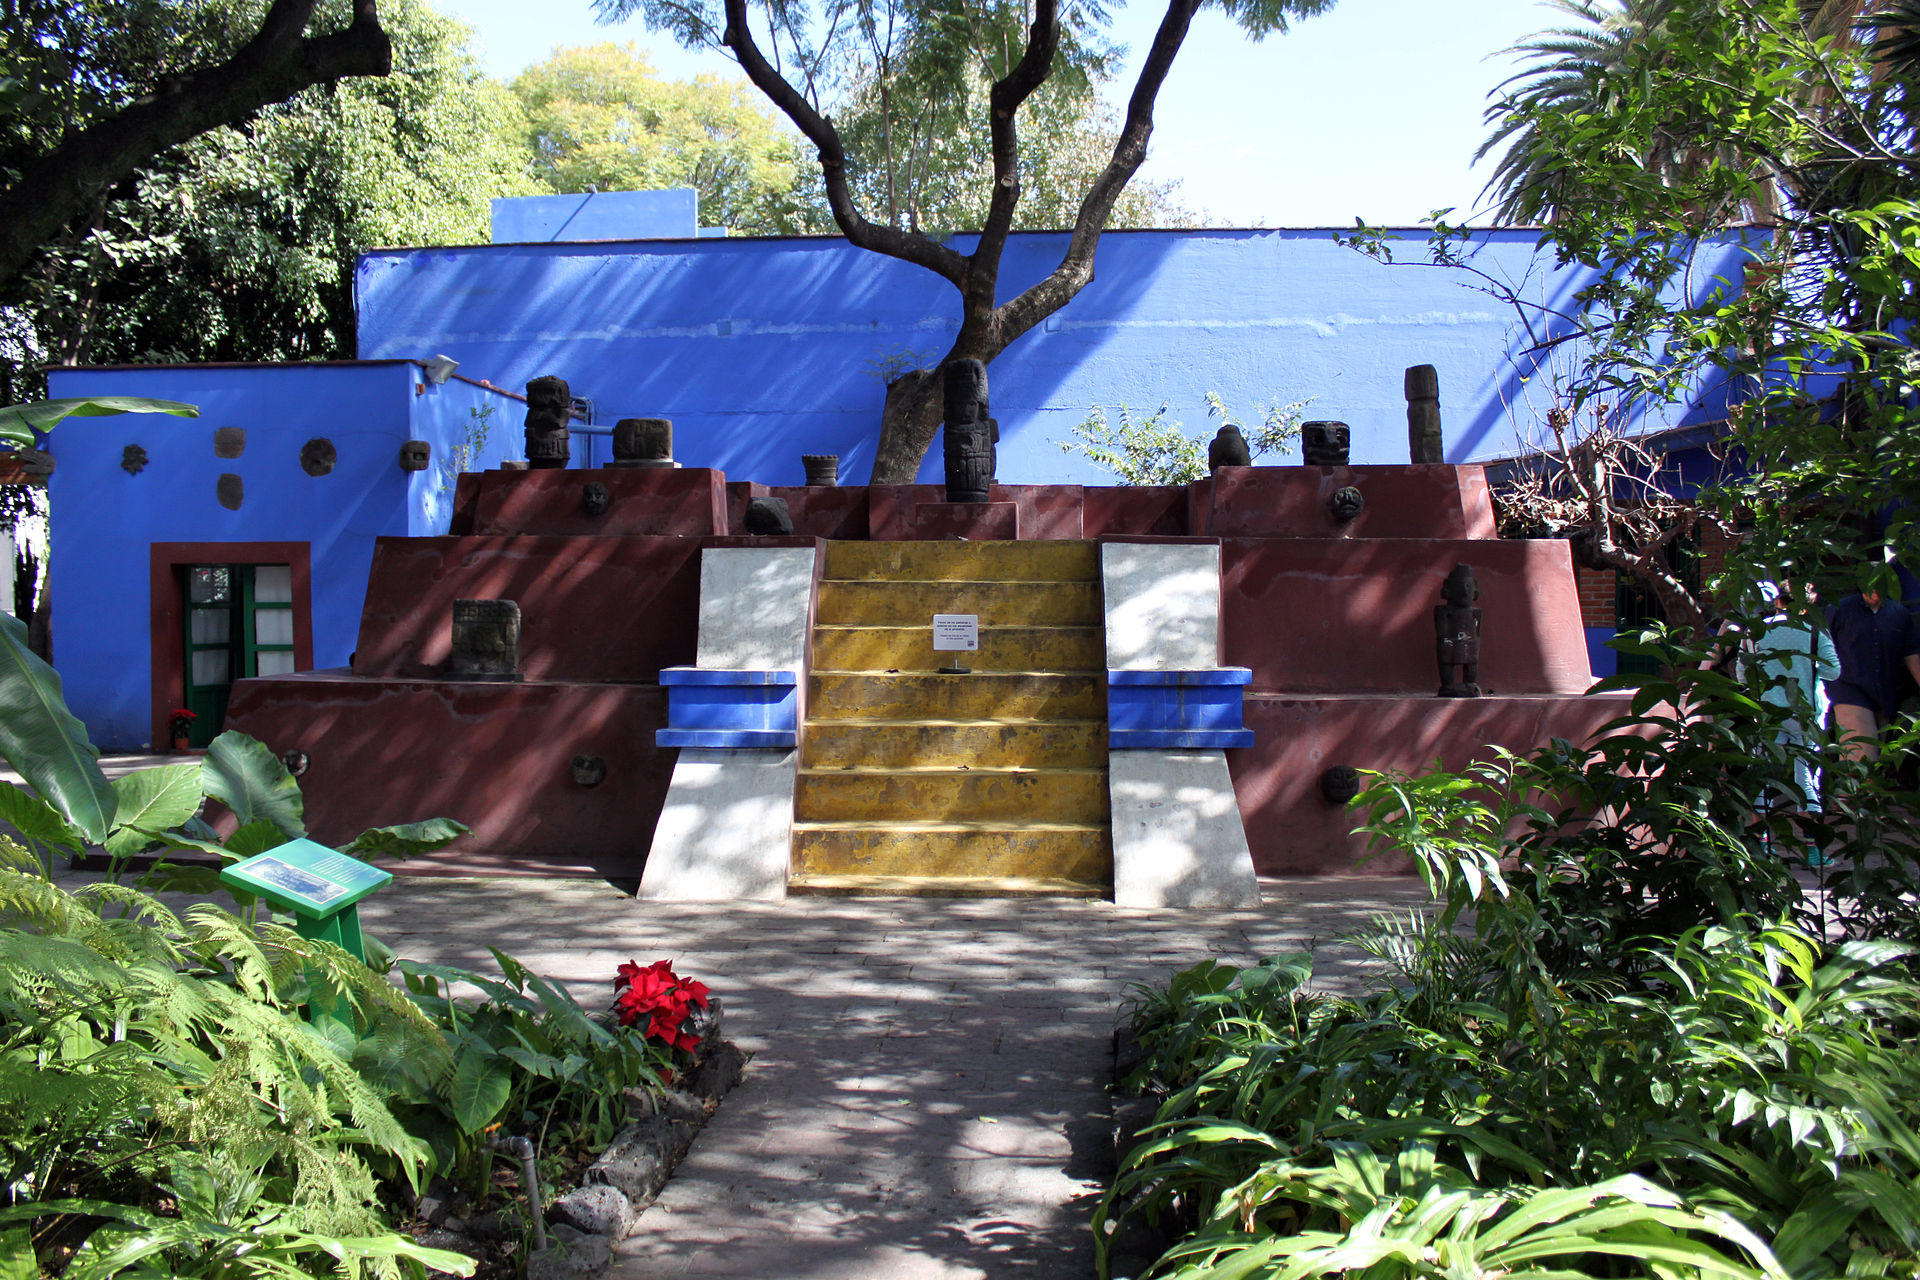 A tomb in the form of a pyramid is the focal point of the garden at Frida Kahlo Museum in the Coyoacan suburb of Mexico City. The museum was Frida Kahlo's residence and studio, and is known as Casa Azul, or Blue House. December 22, 2013 photo by Anagoria, licensed under the Creative Commons Attribution 3.0 Unported license.